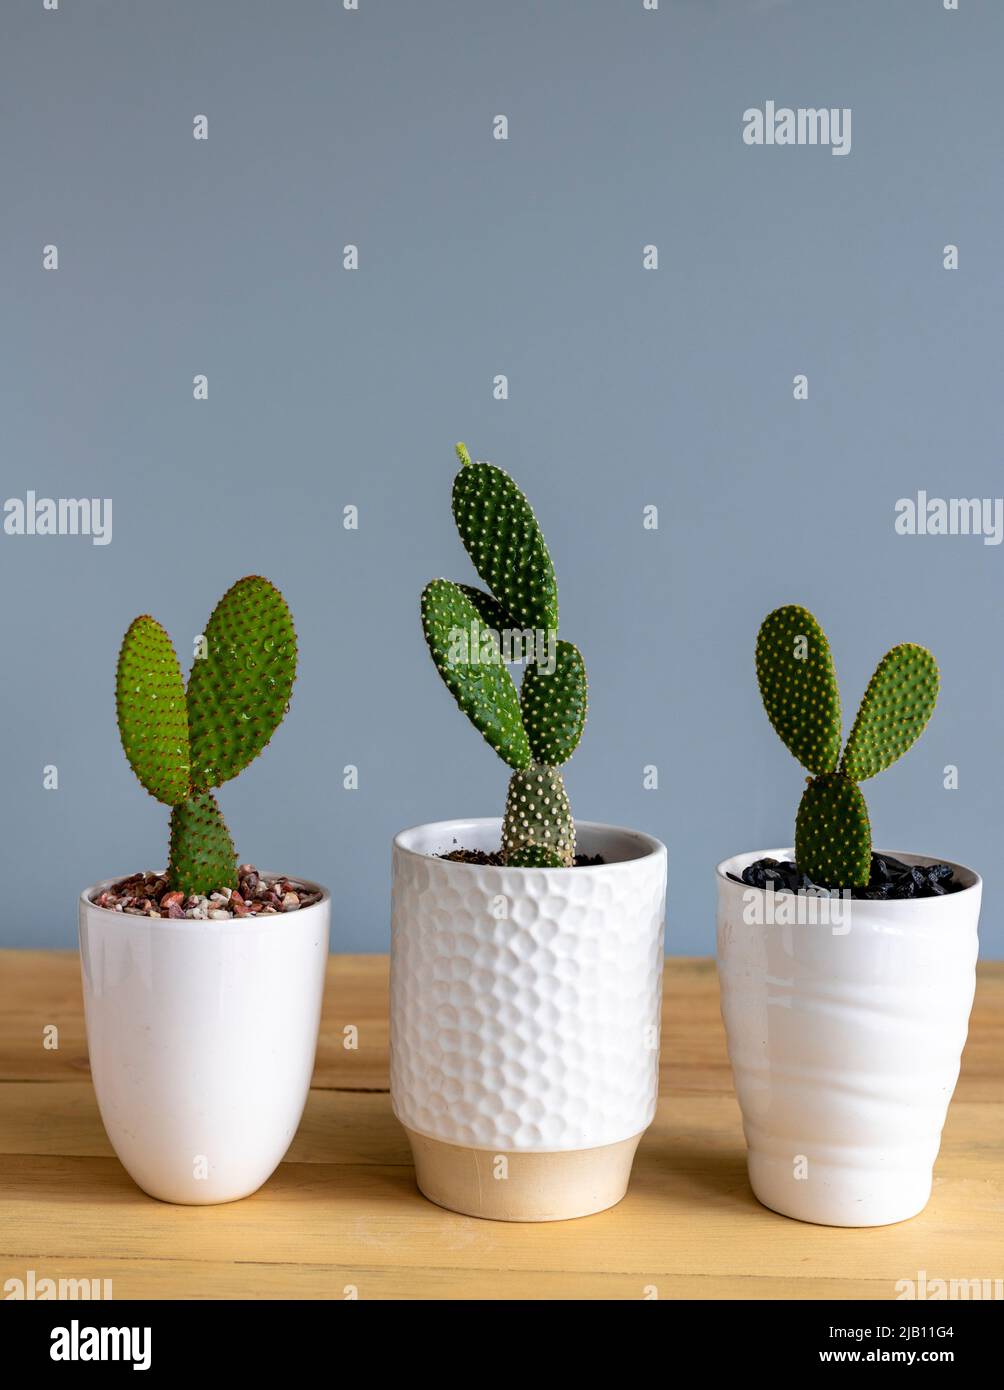 Three different color bunny ears cactus in pots Stock Photo